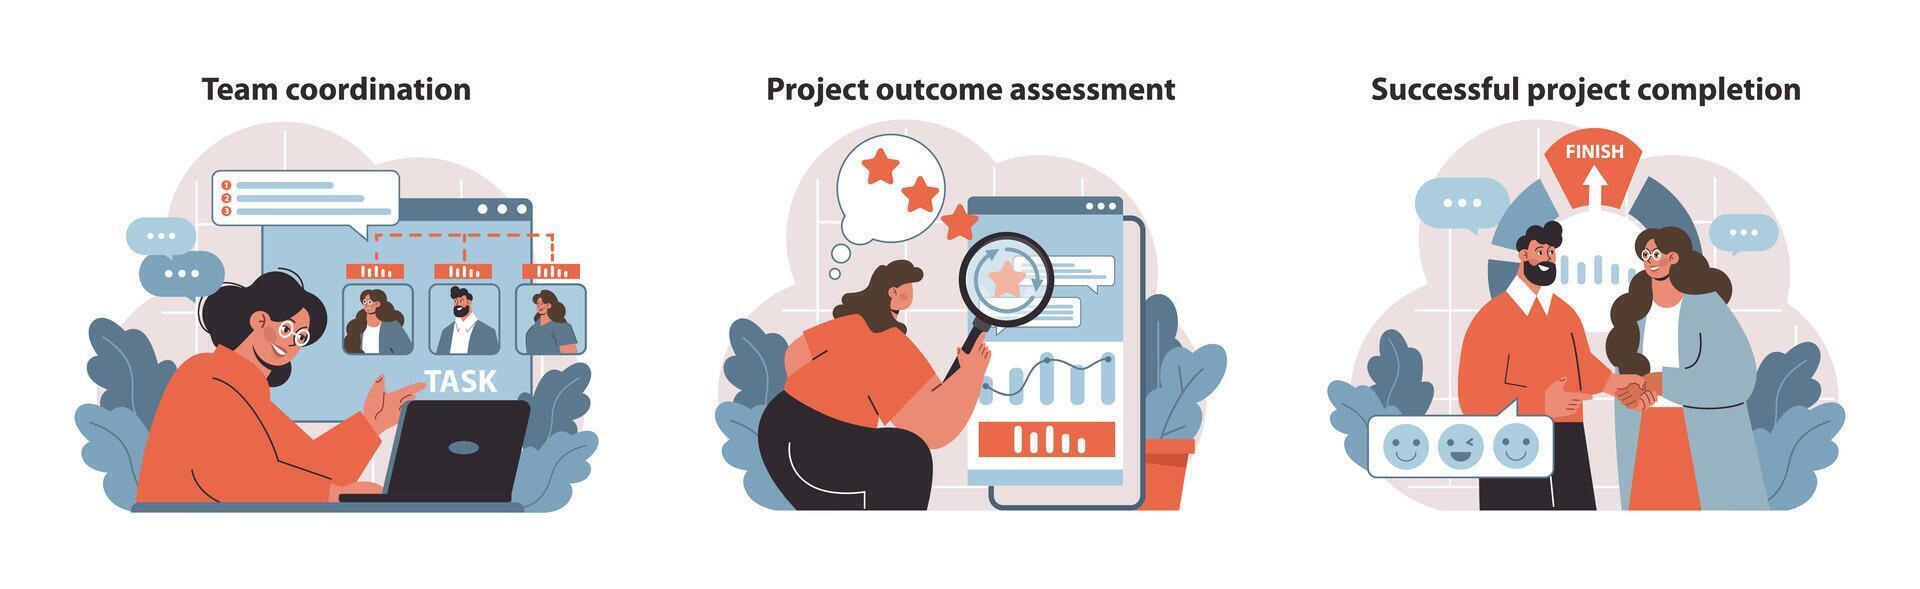 Project Management dynamics. Coordinating teams, assessing outcomes vector